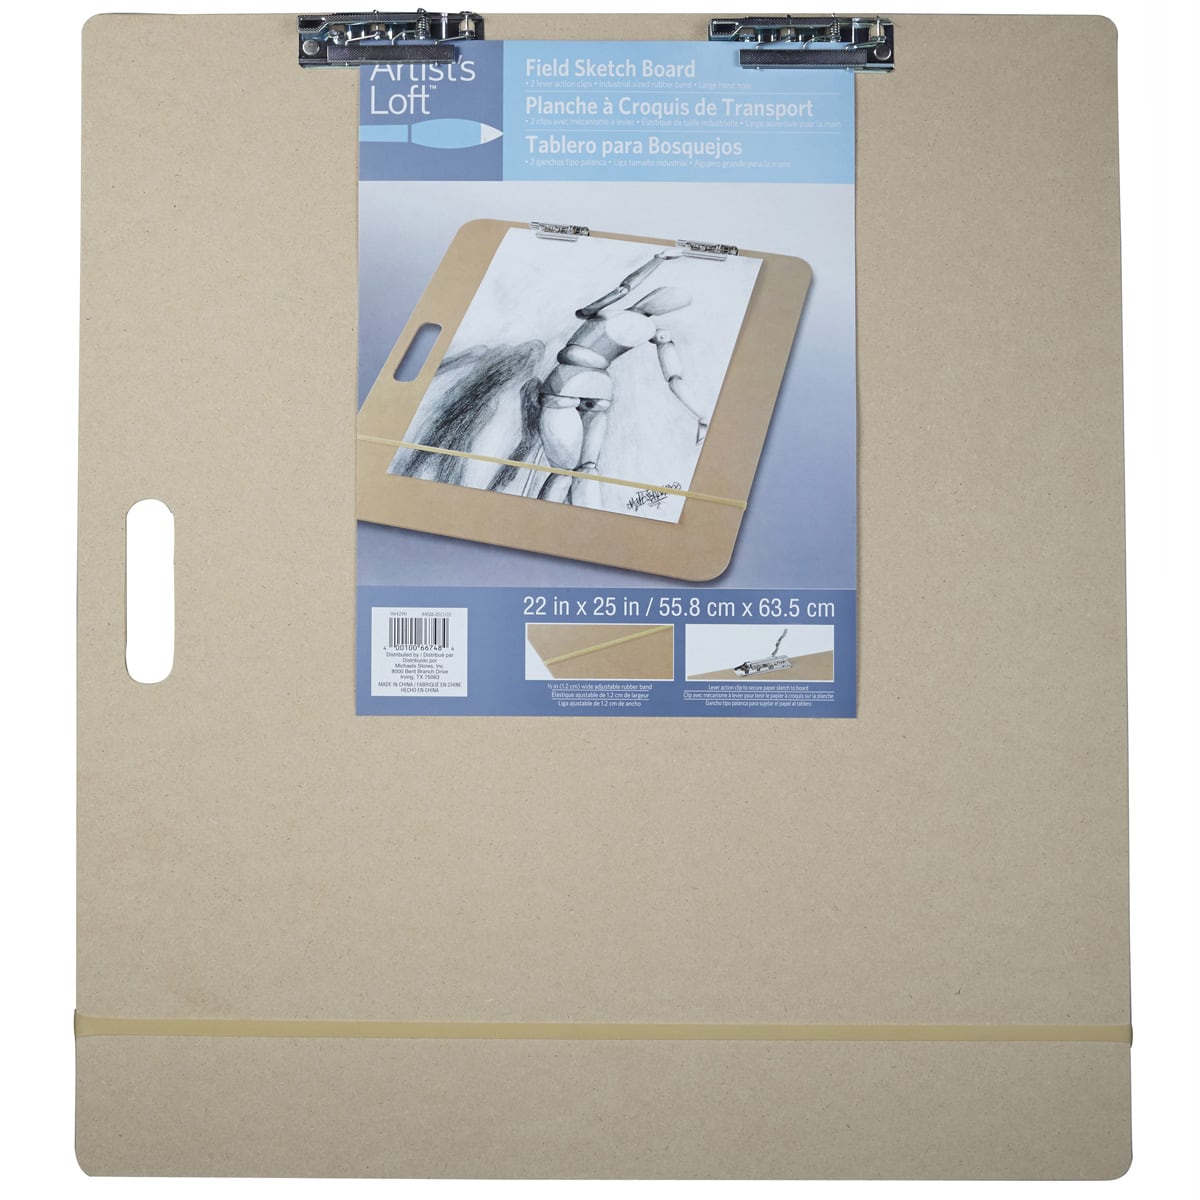 Acurit PXB Drawing Boards for Artists and Designers - Portable Workspace  for Drawing, Sketching, Drafting, Painting - Multi-Angled Laminated Surface